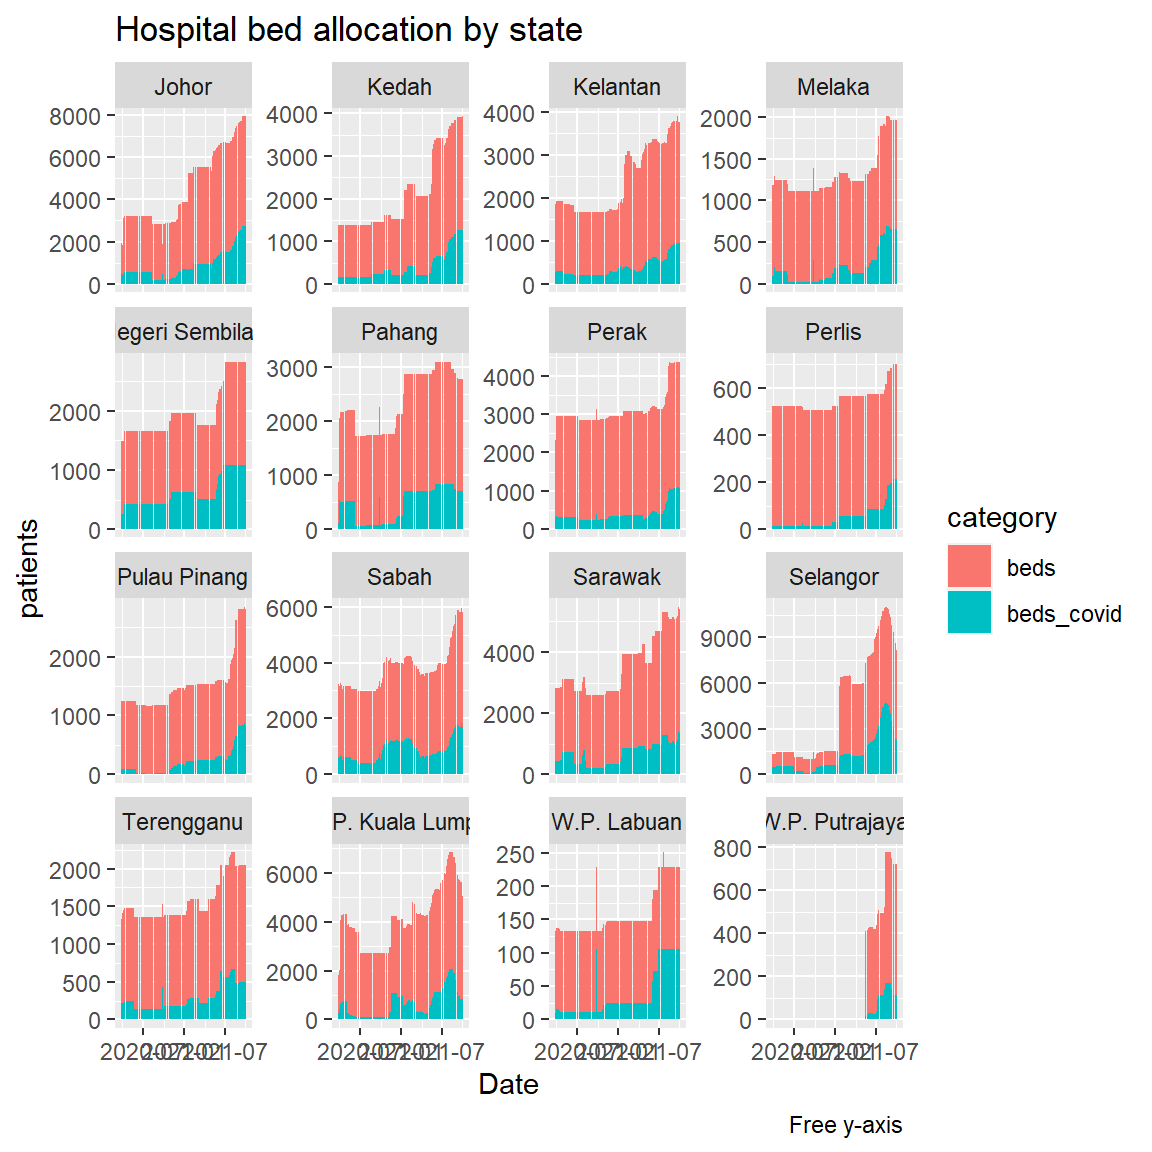 Hospital bed allocation by states